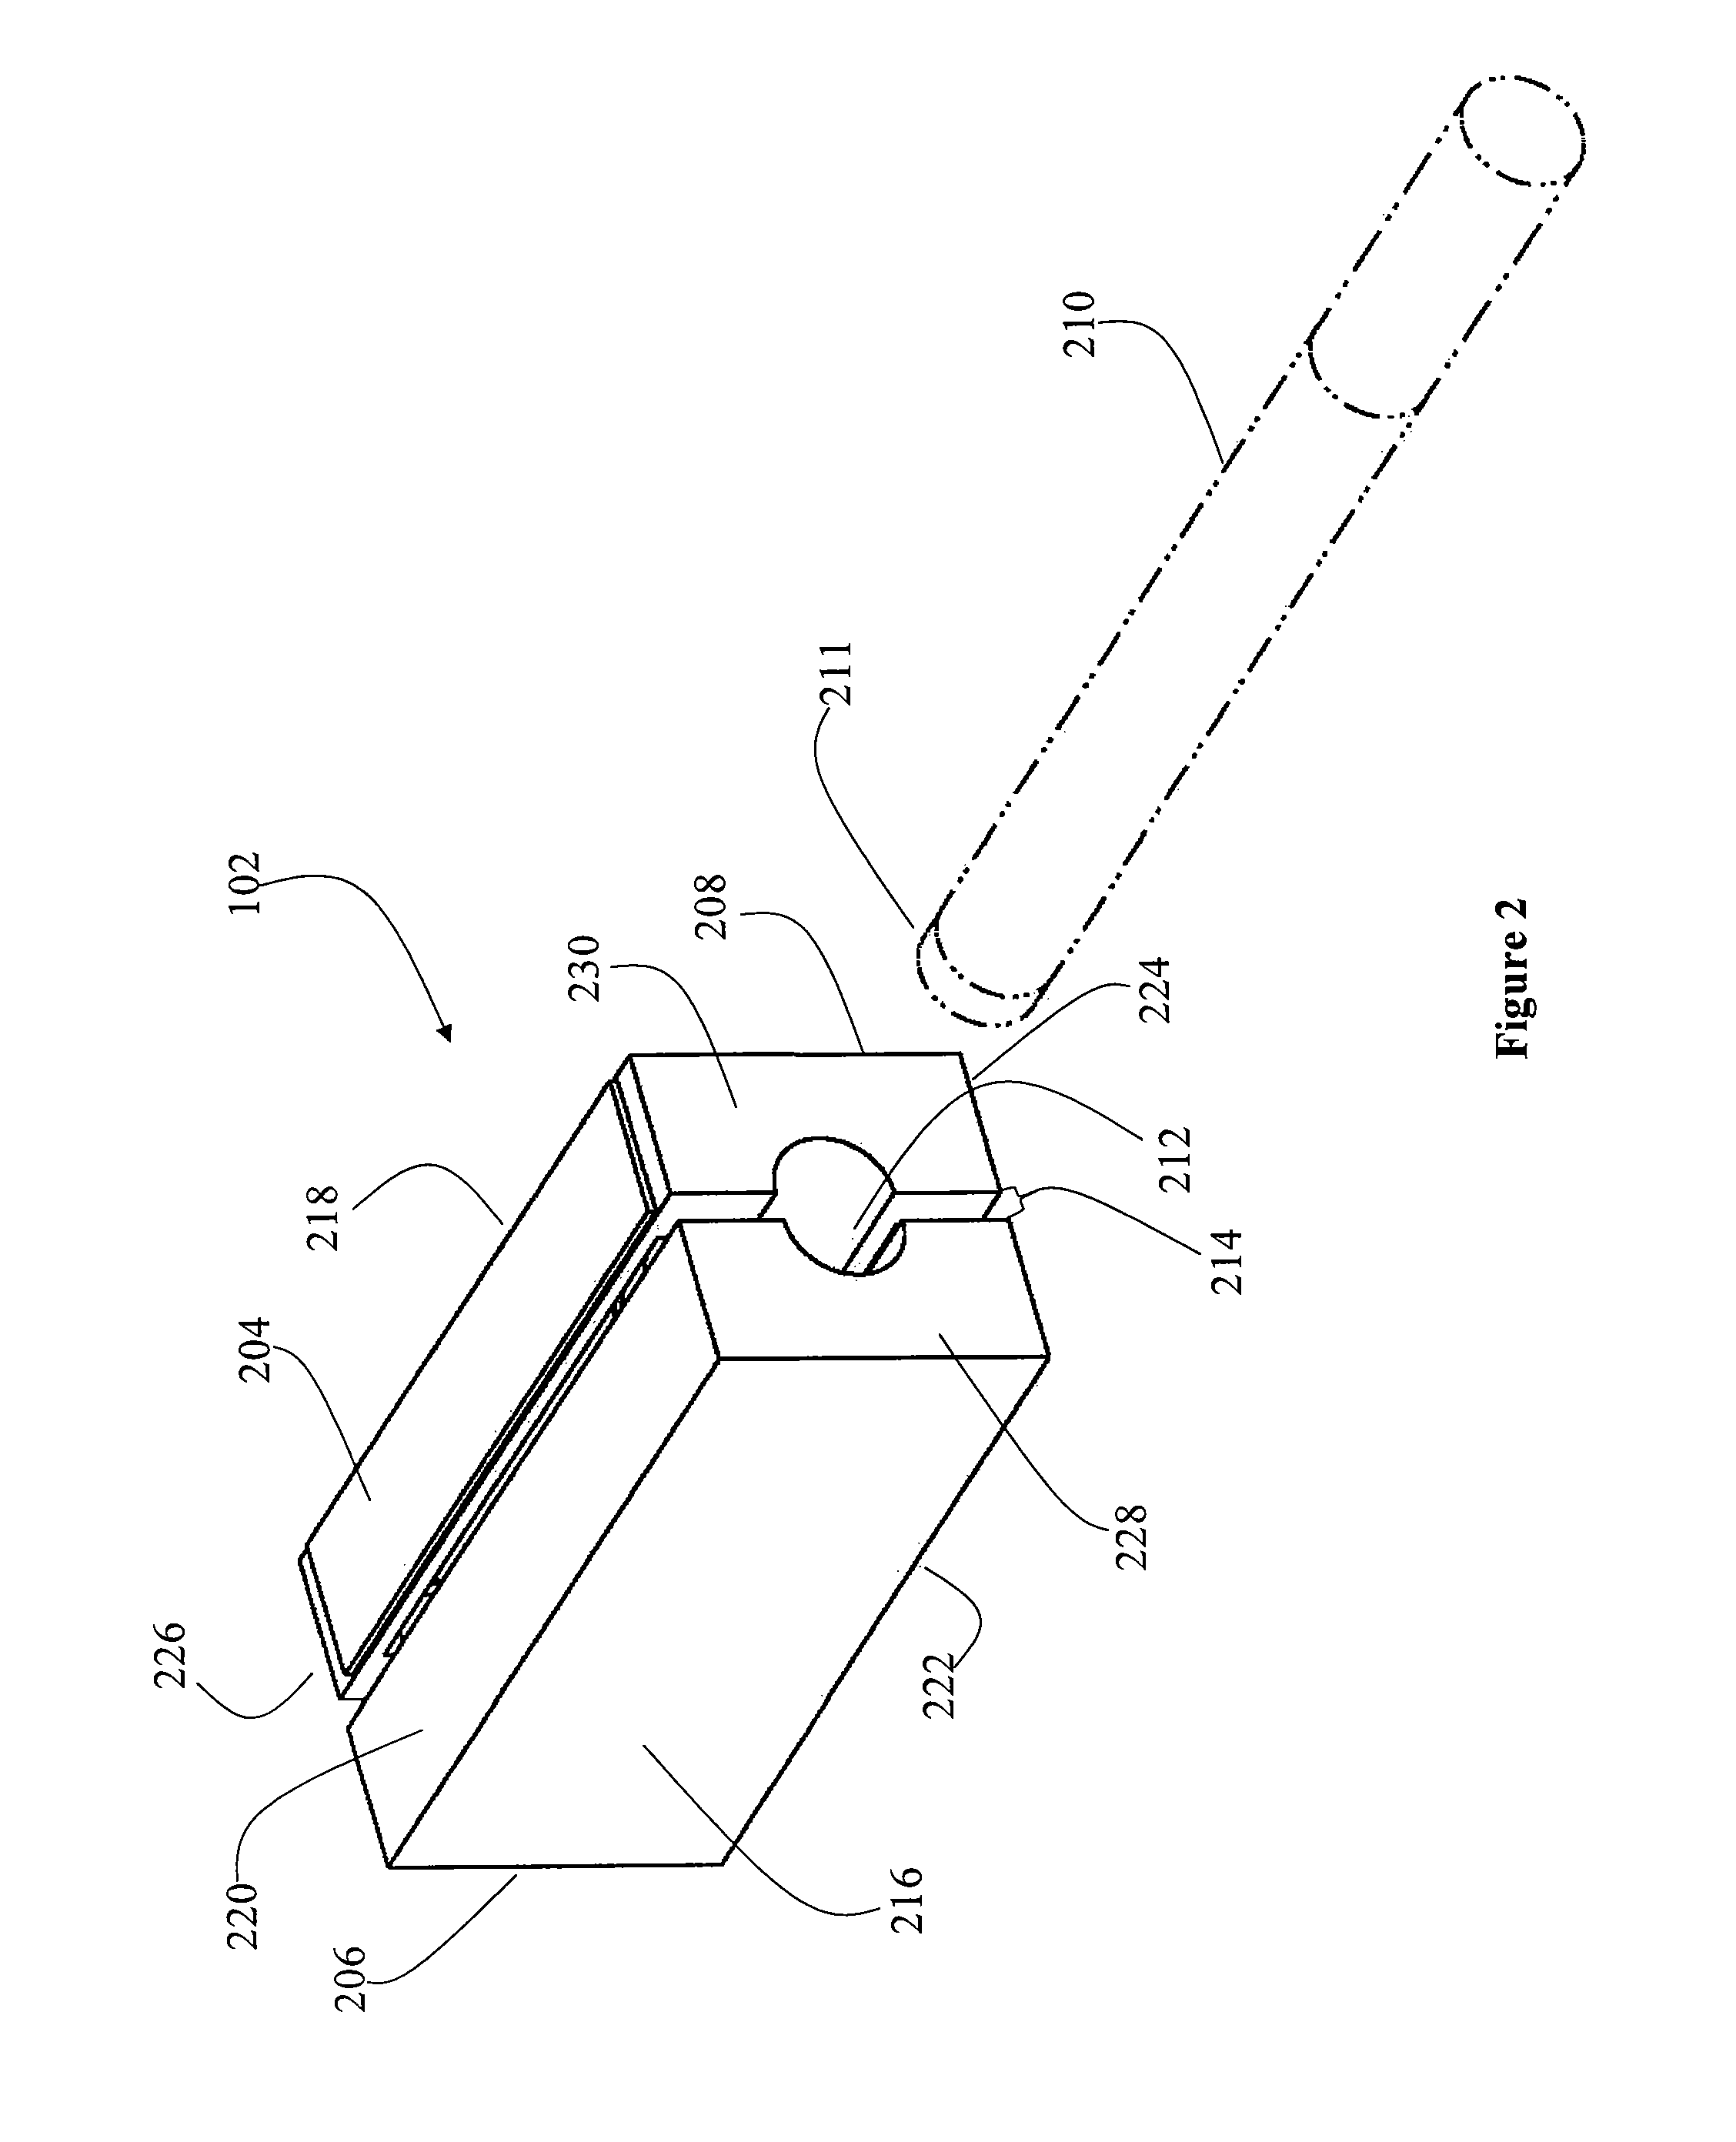 Lighting apparatus for tobacco-based products